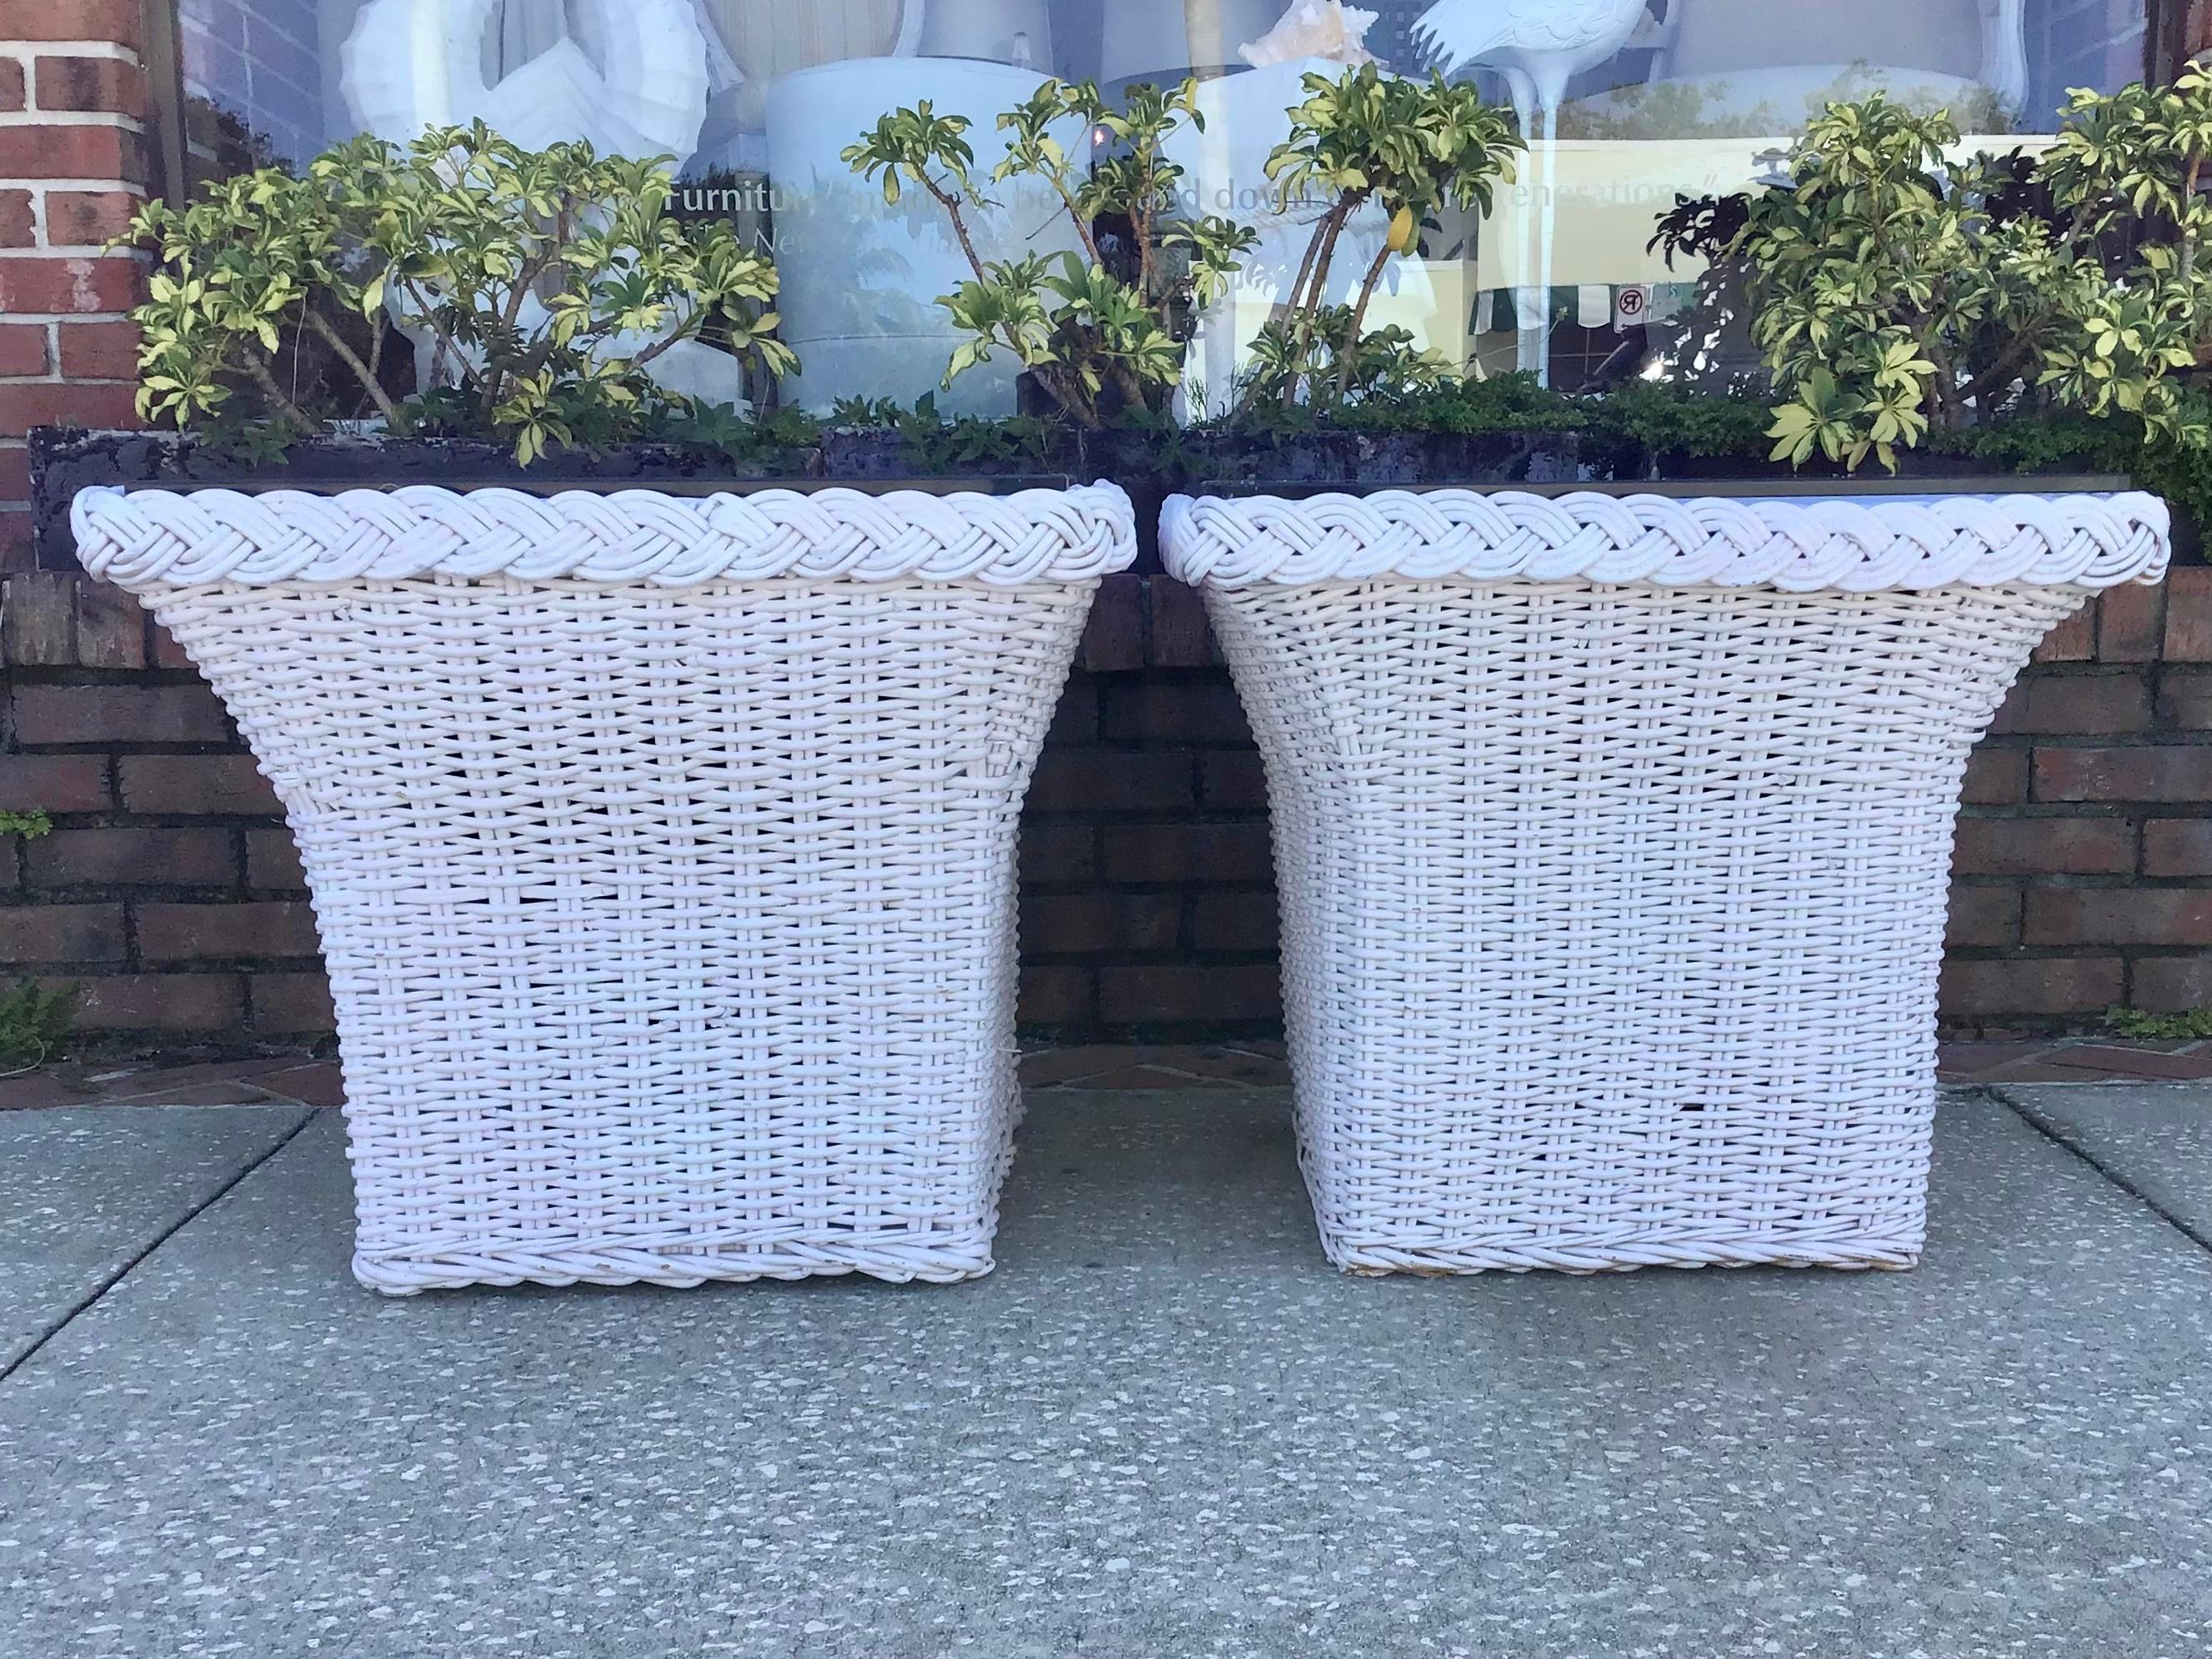 Bielecky Brothers Large pair of Boho Chic woven rattan square side tables with glass tops included. These would make great side tables with a coastal vibe.